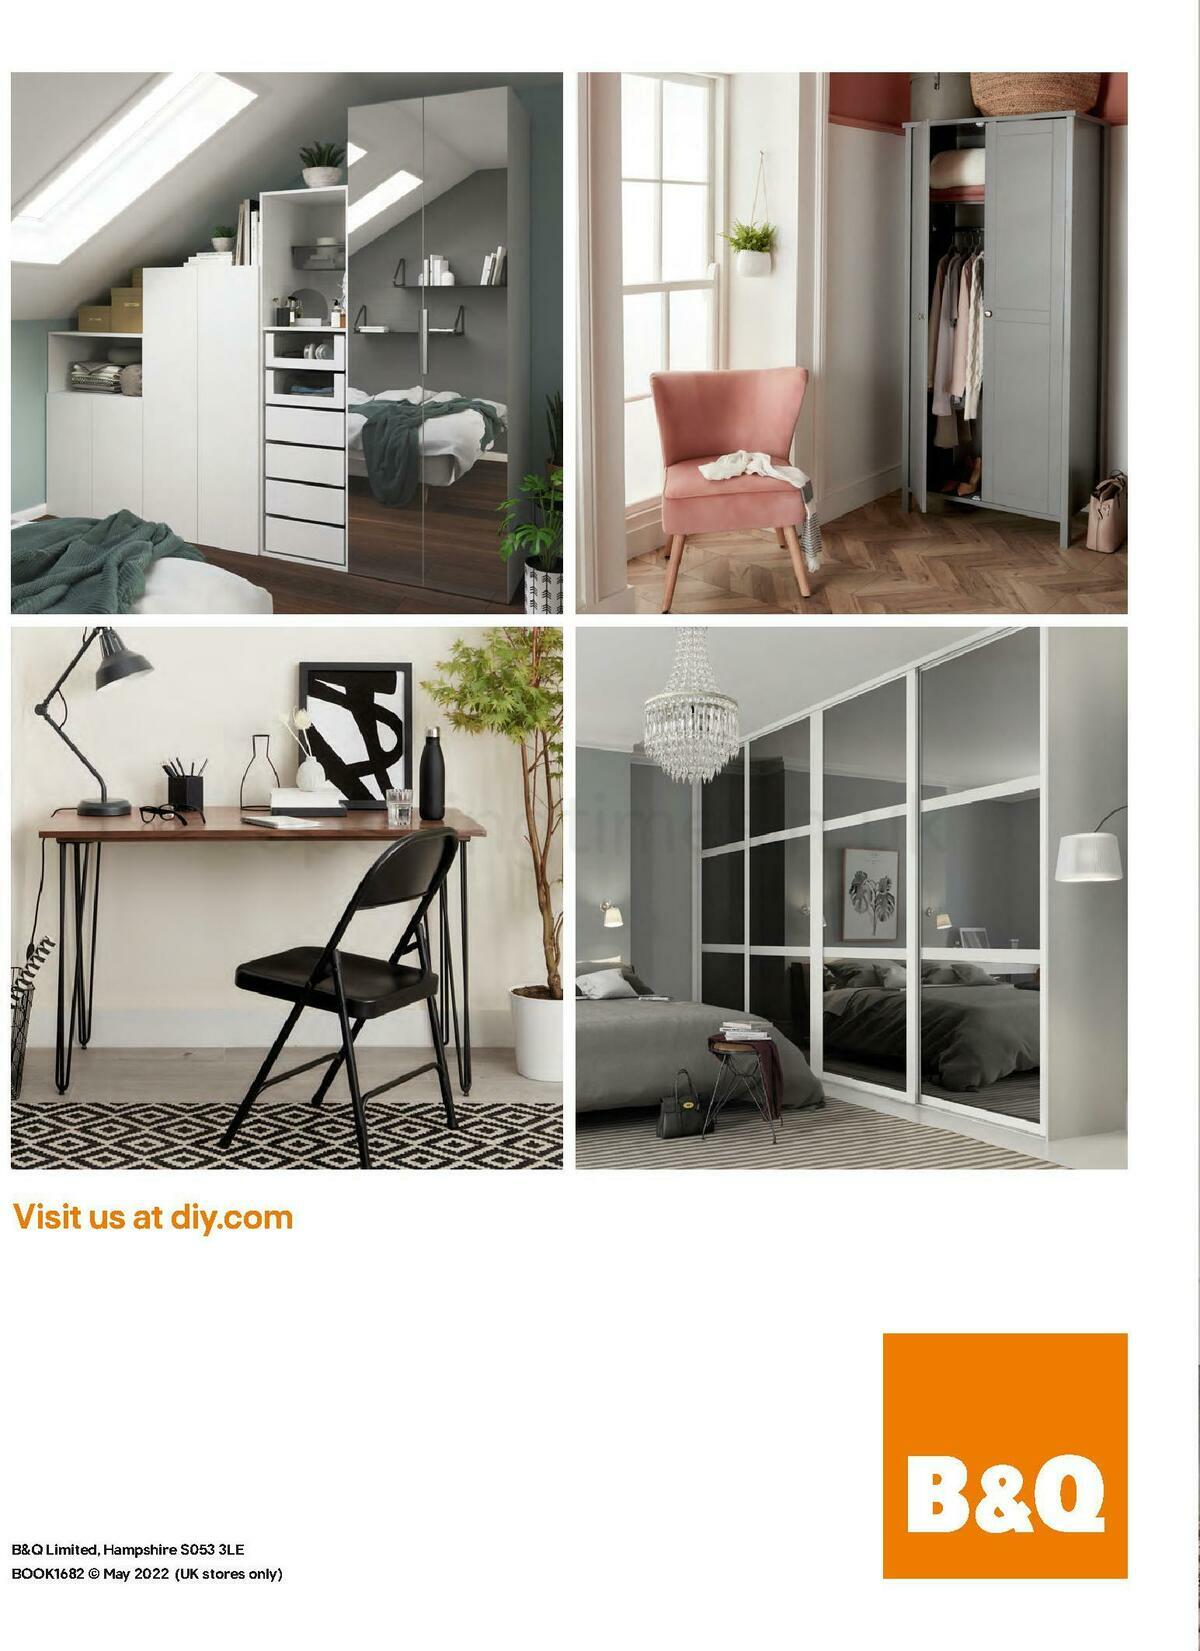 B&Q Indoor Furniture Offers from 1 June